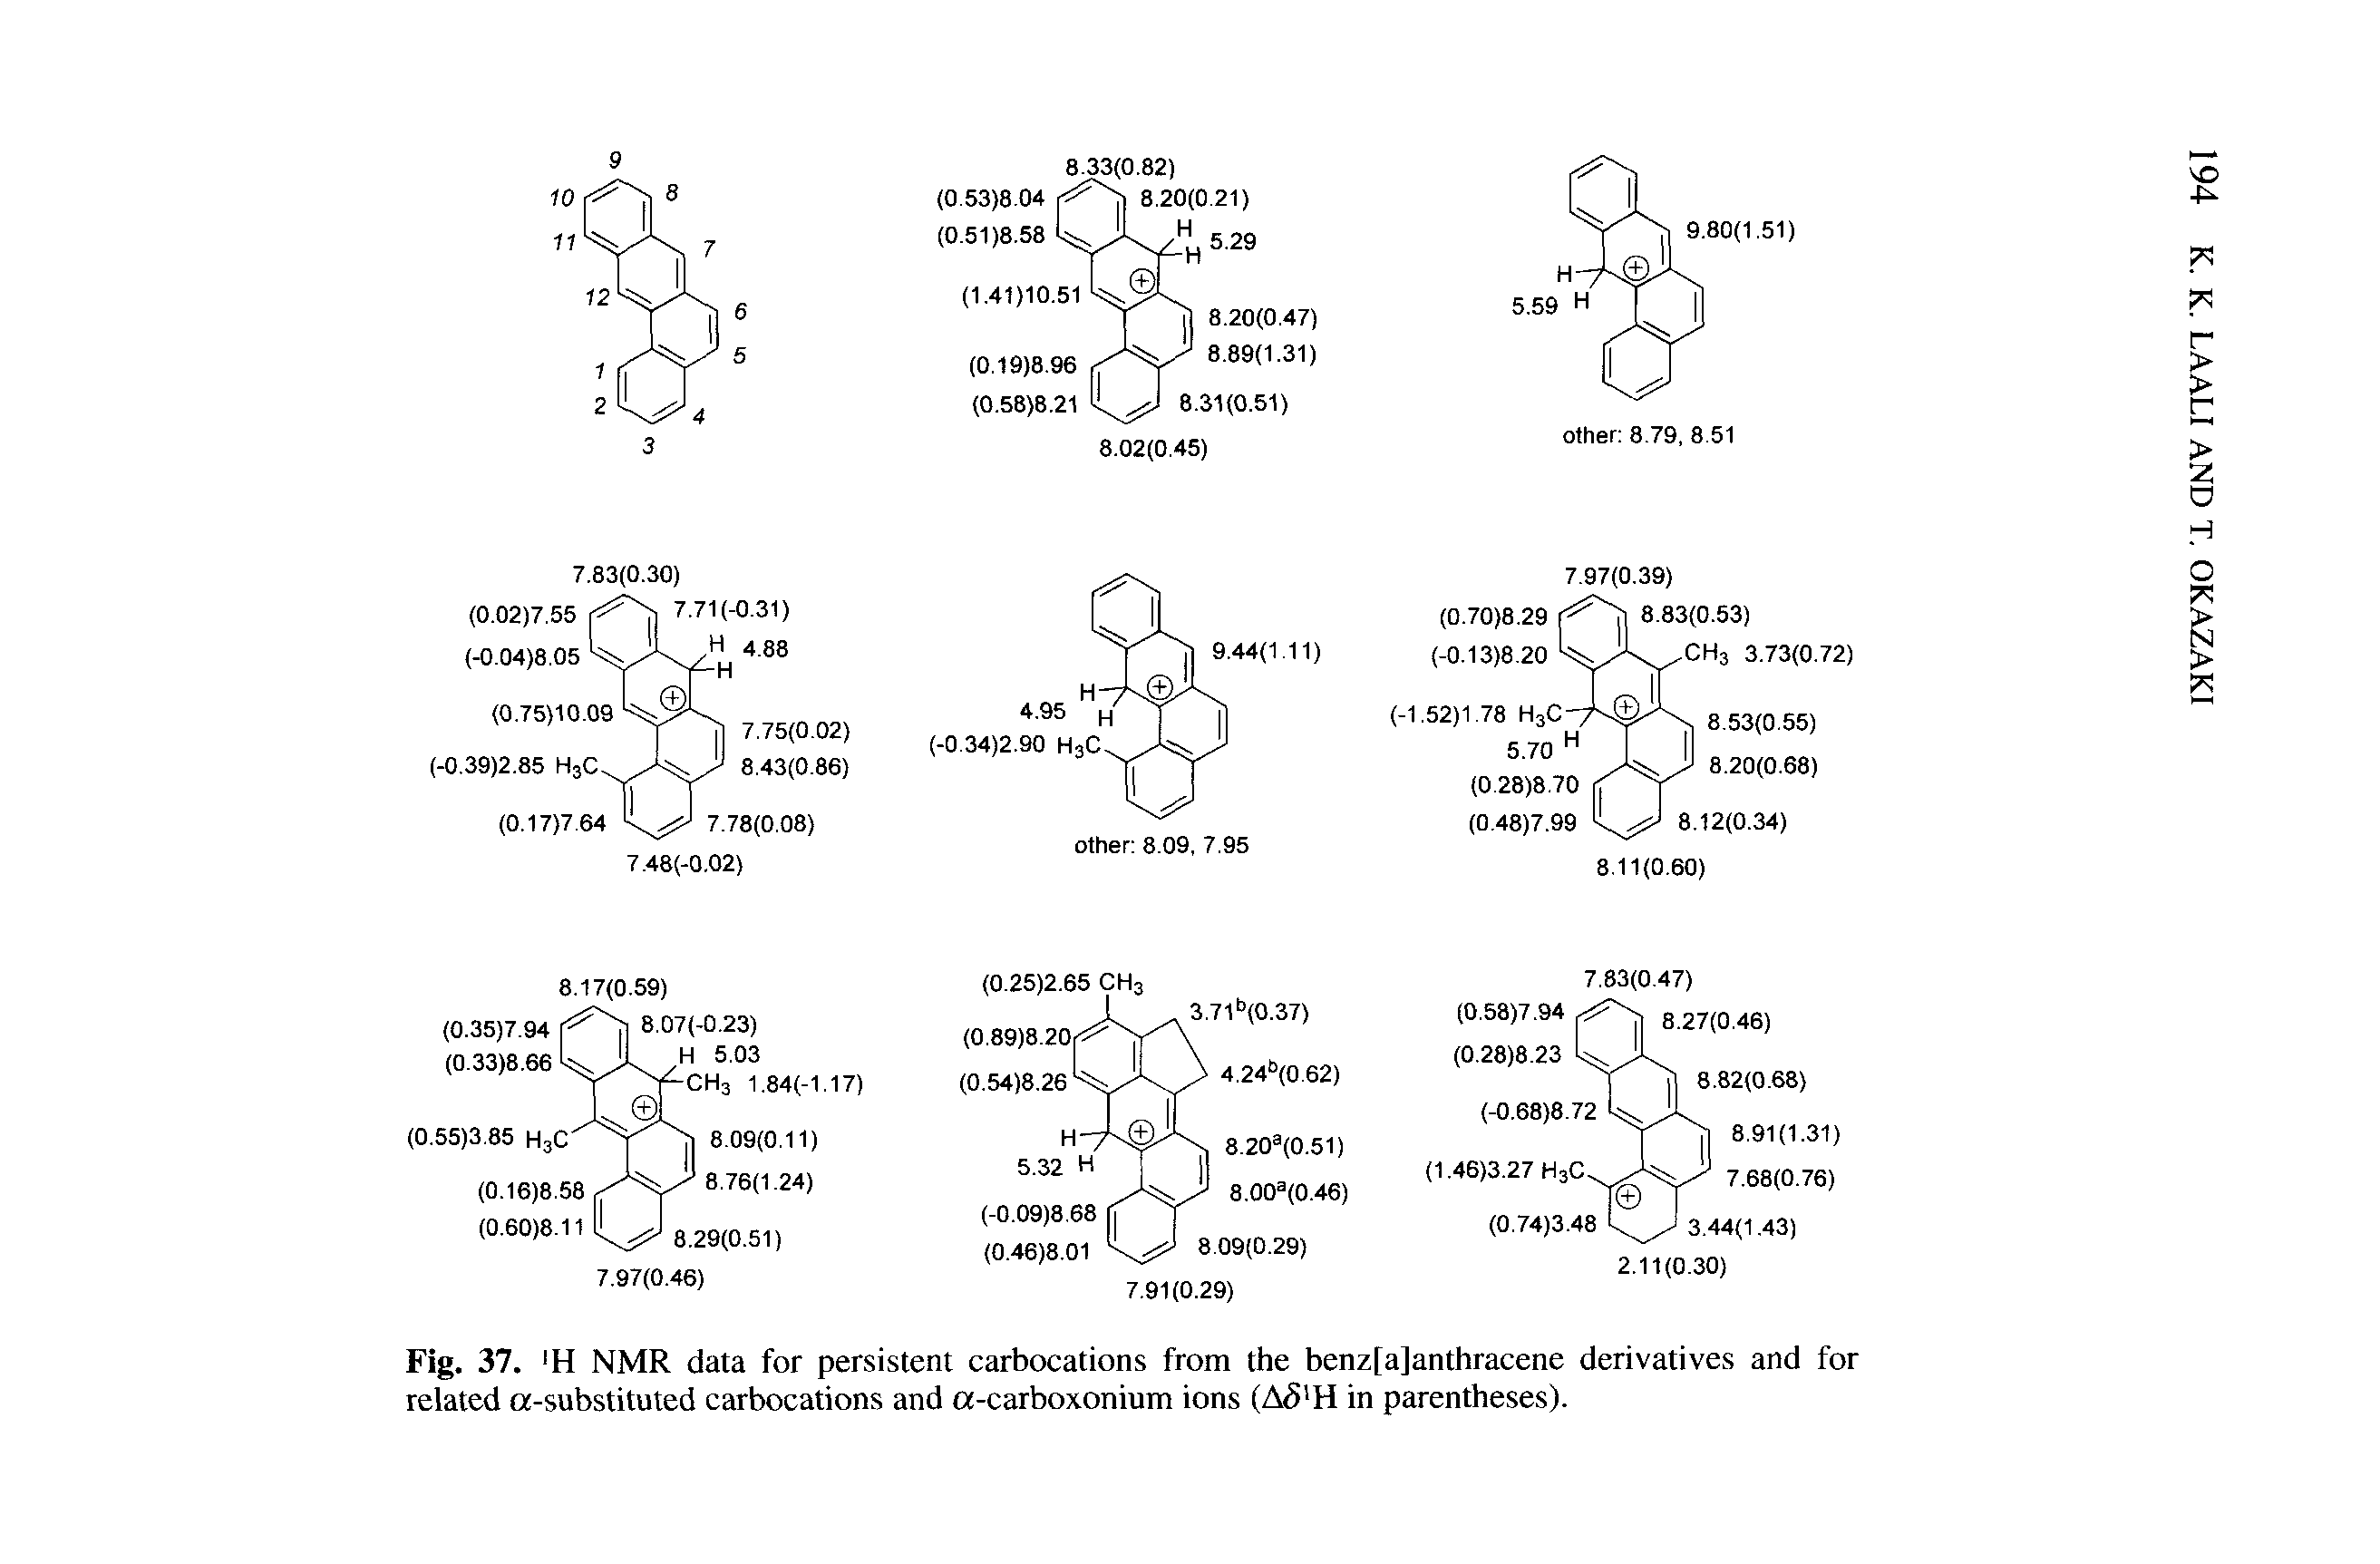 Fig. 37. H NMR data for persistent carbocations from the benz[a]anthracene derivatives and for related a-substituted carbocations and a-carboxonium ions (A5 H in parentheses).